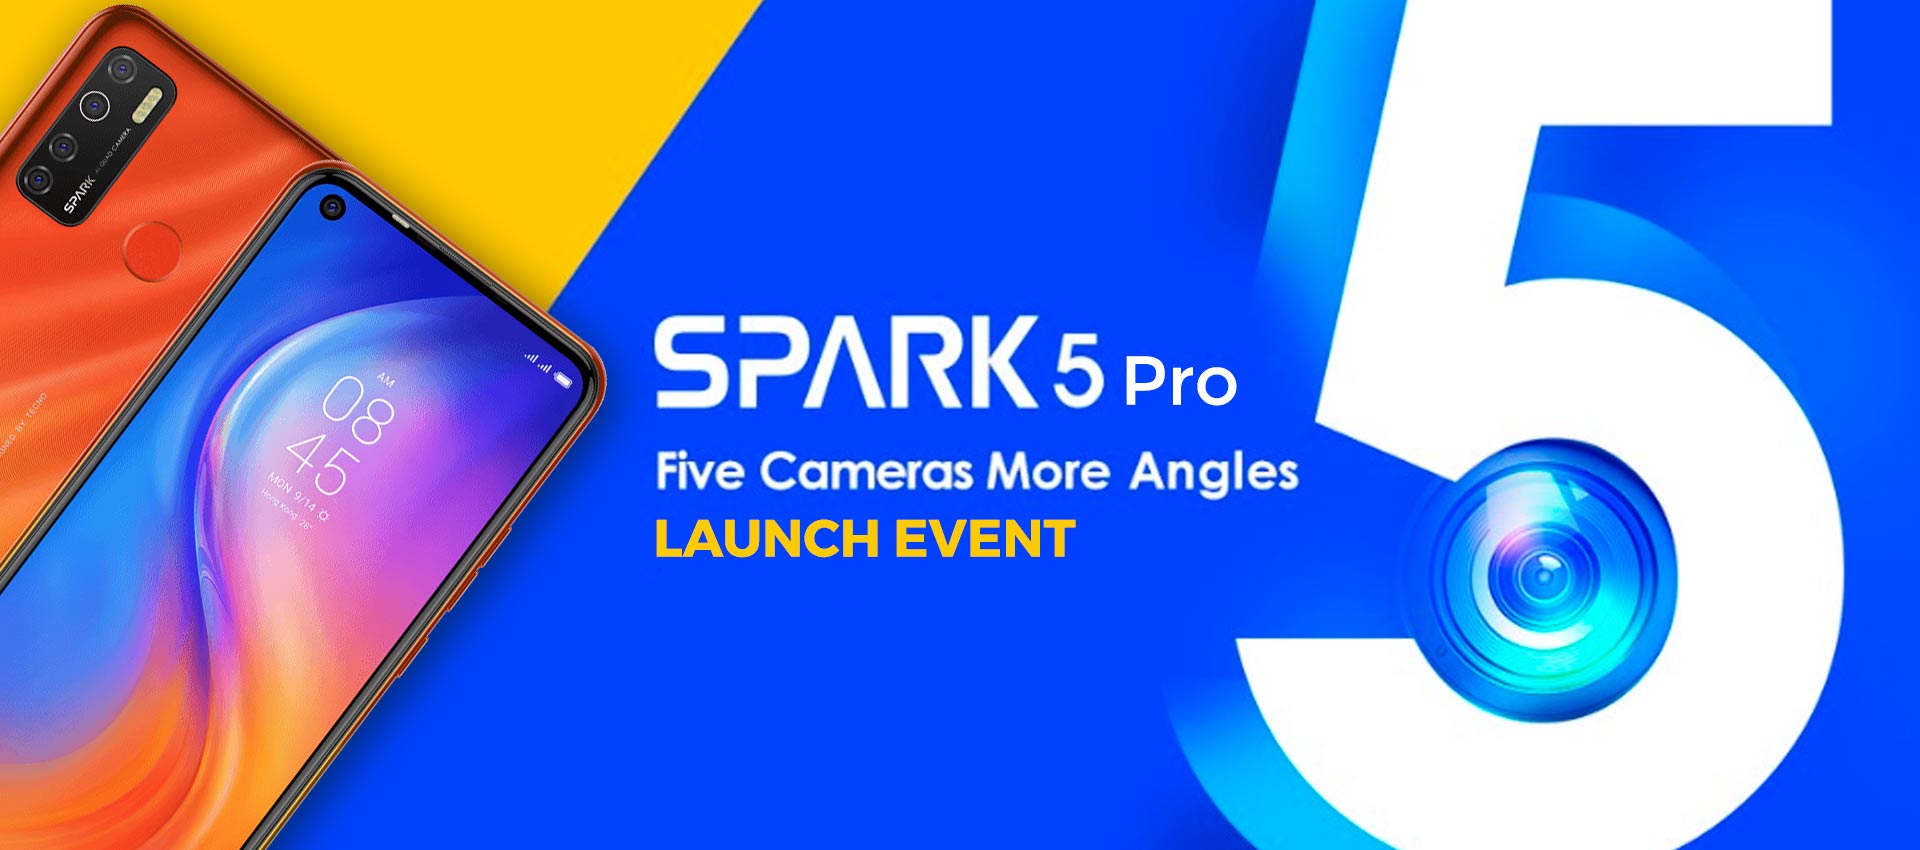 All About Tecno Spark 5 Pro Launch Event on Facebook